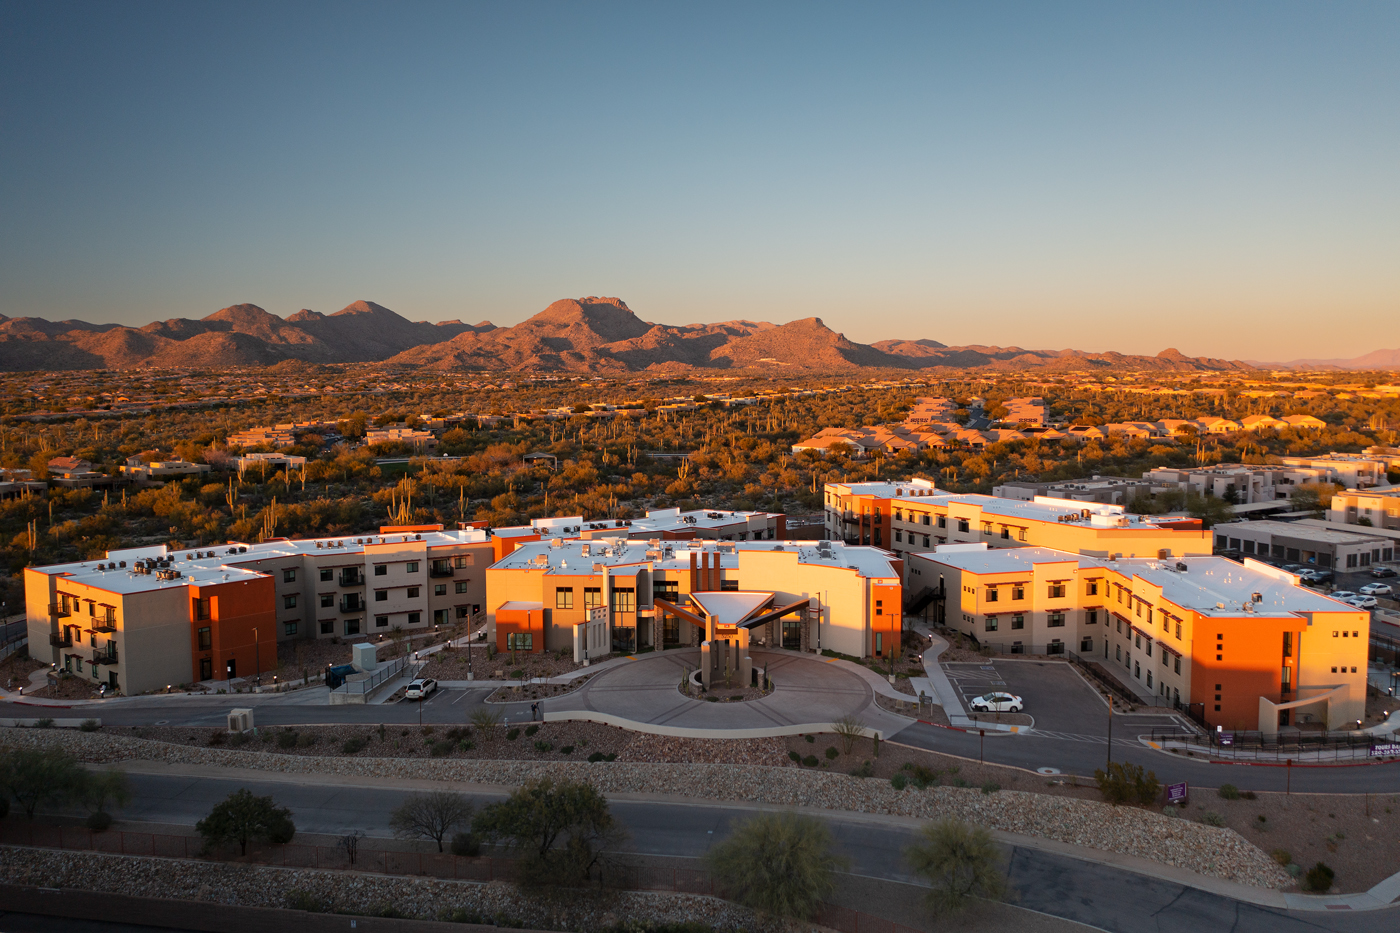 This senior living retirement community is located at 5250 West Dove Centre Road, Marana, AZ. The property offers a total of 142 units, with the finest in Independent Living, Assisted Living, and Memory Care.